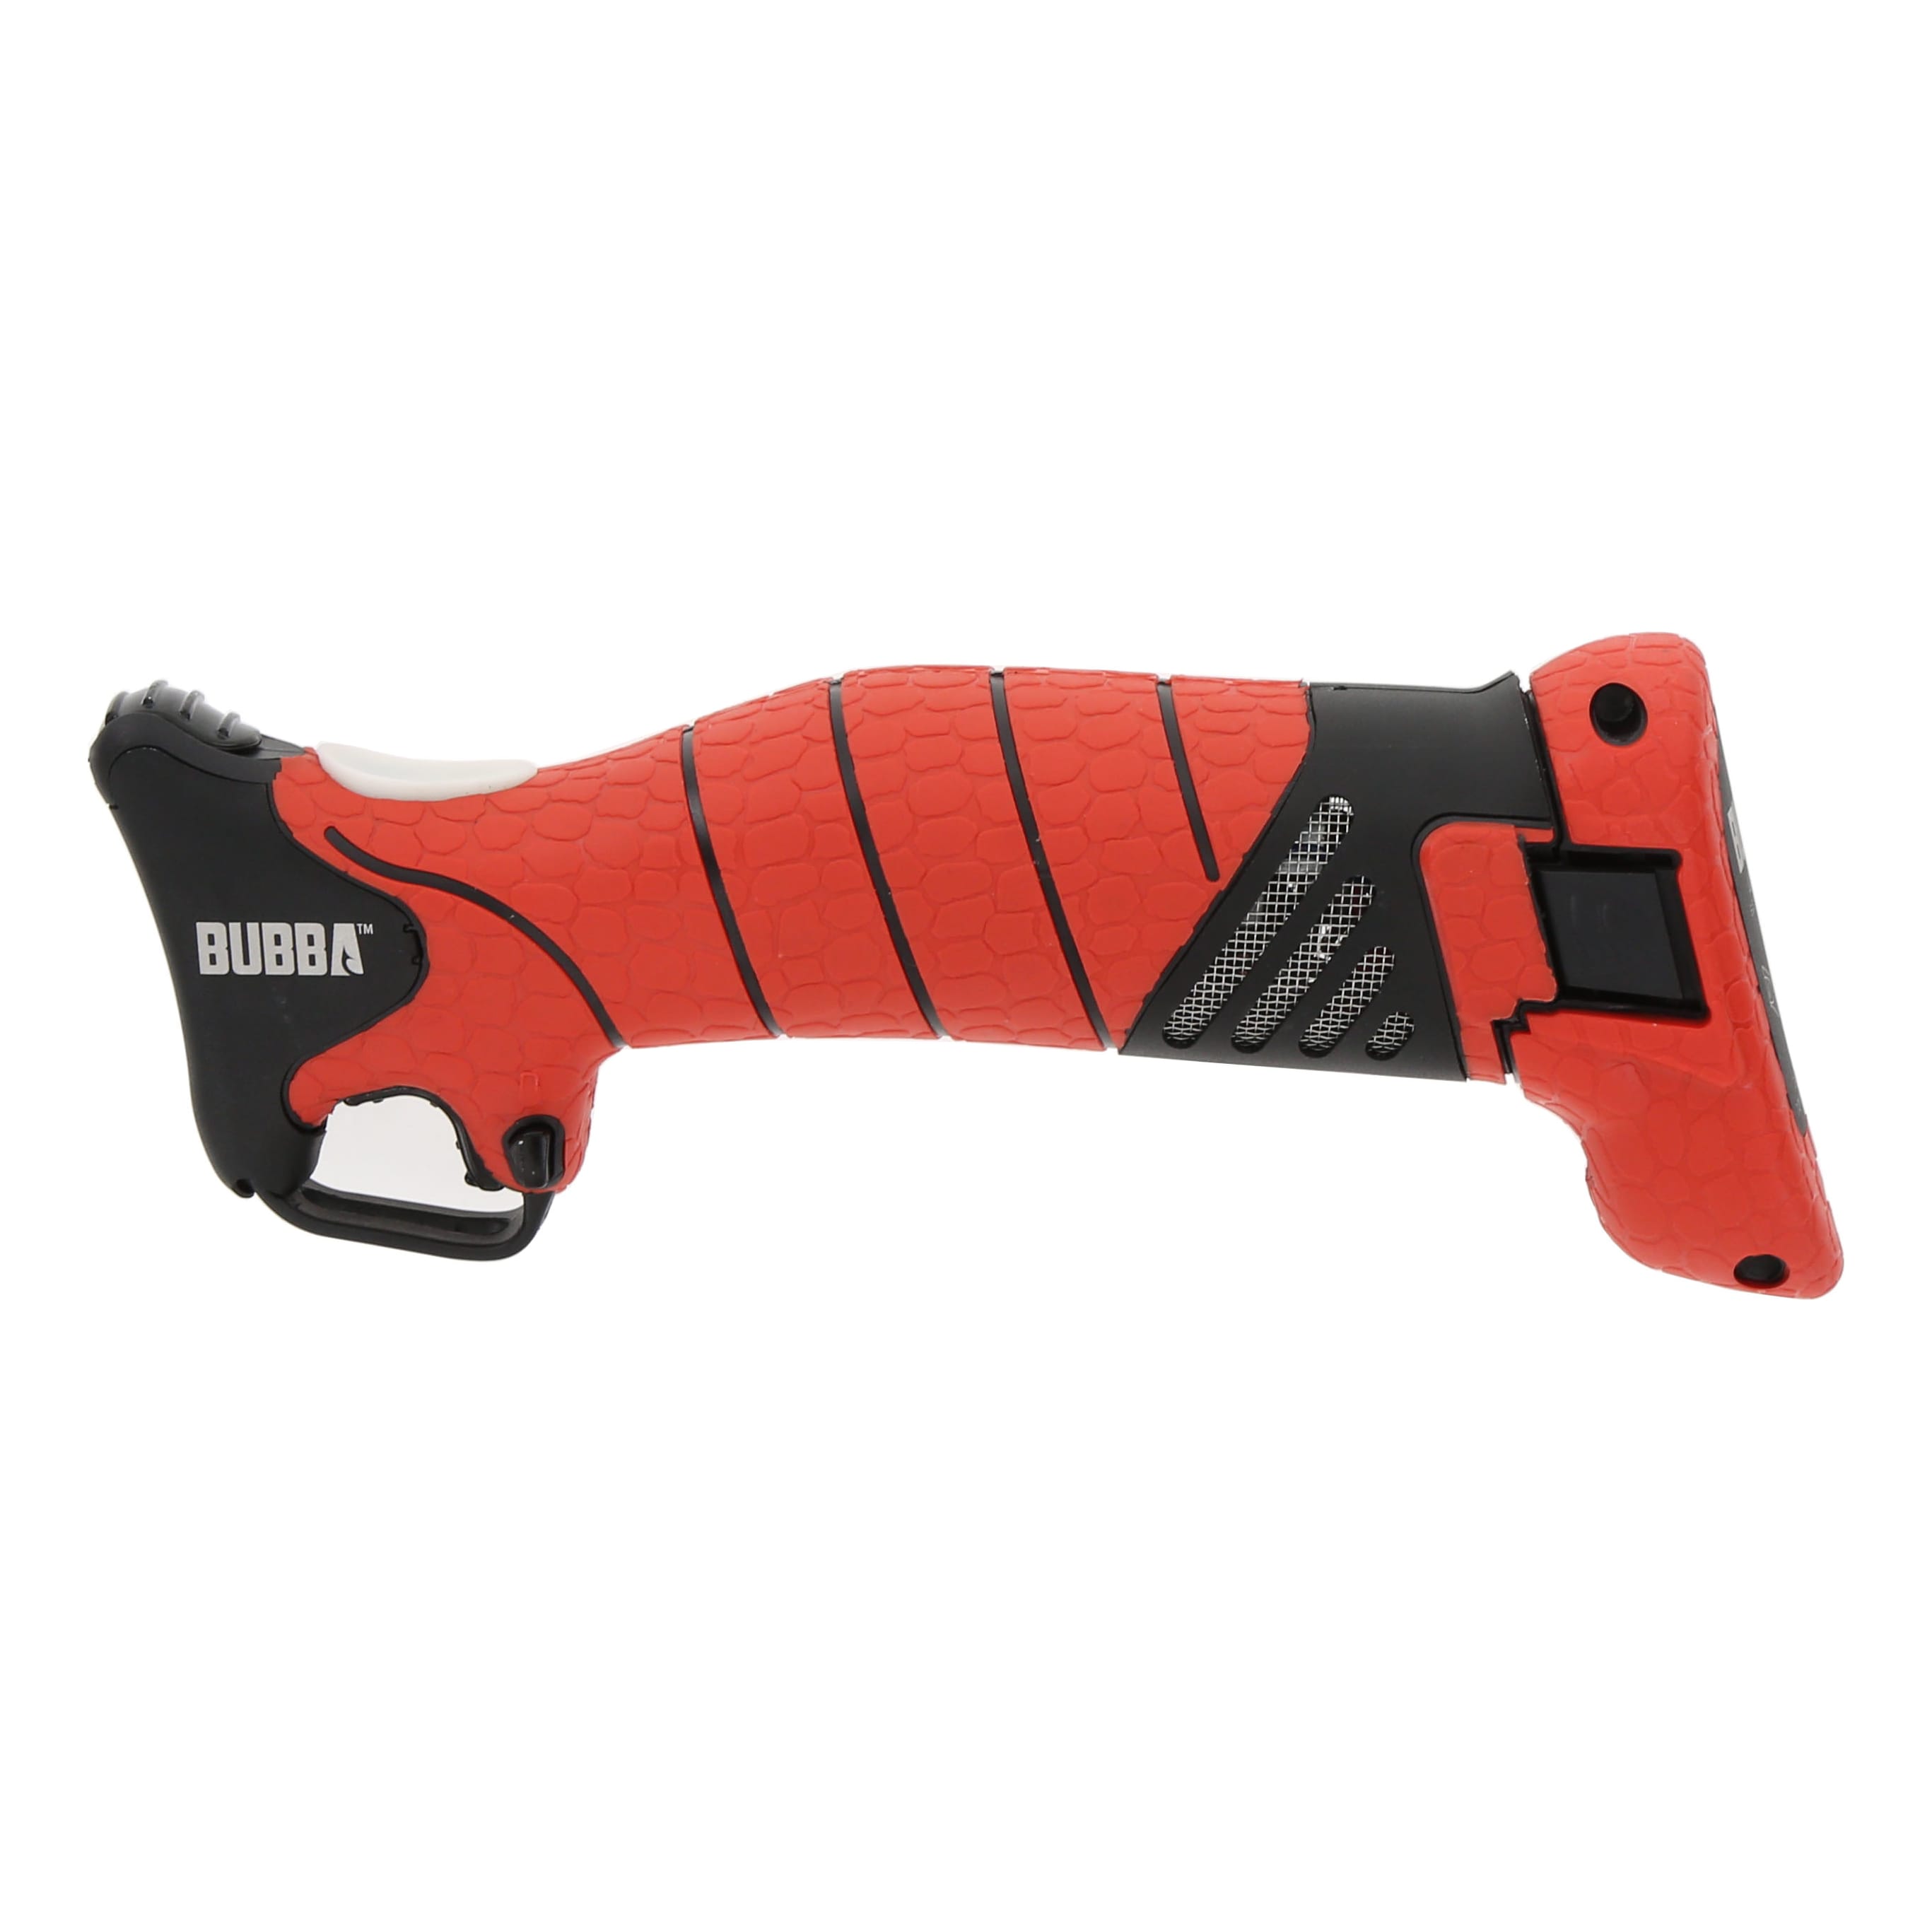 Bubba Pro Series Lithium Ion Electric Fillet Knife